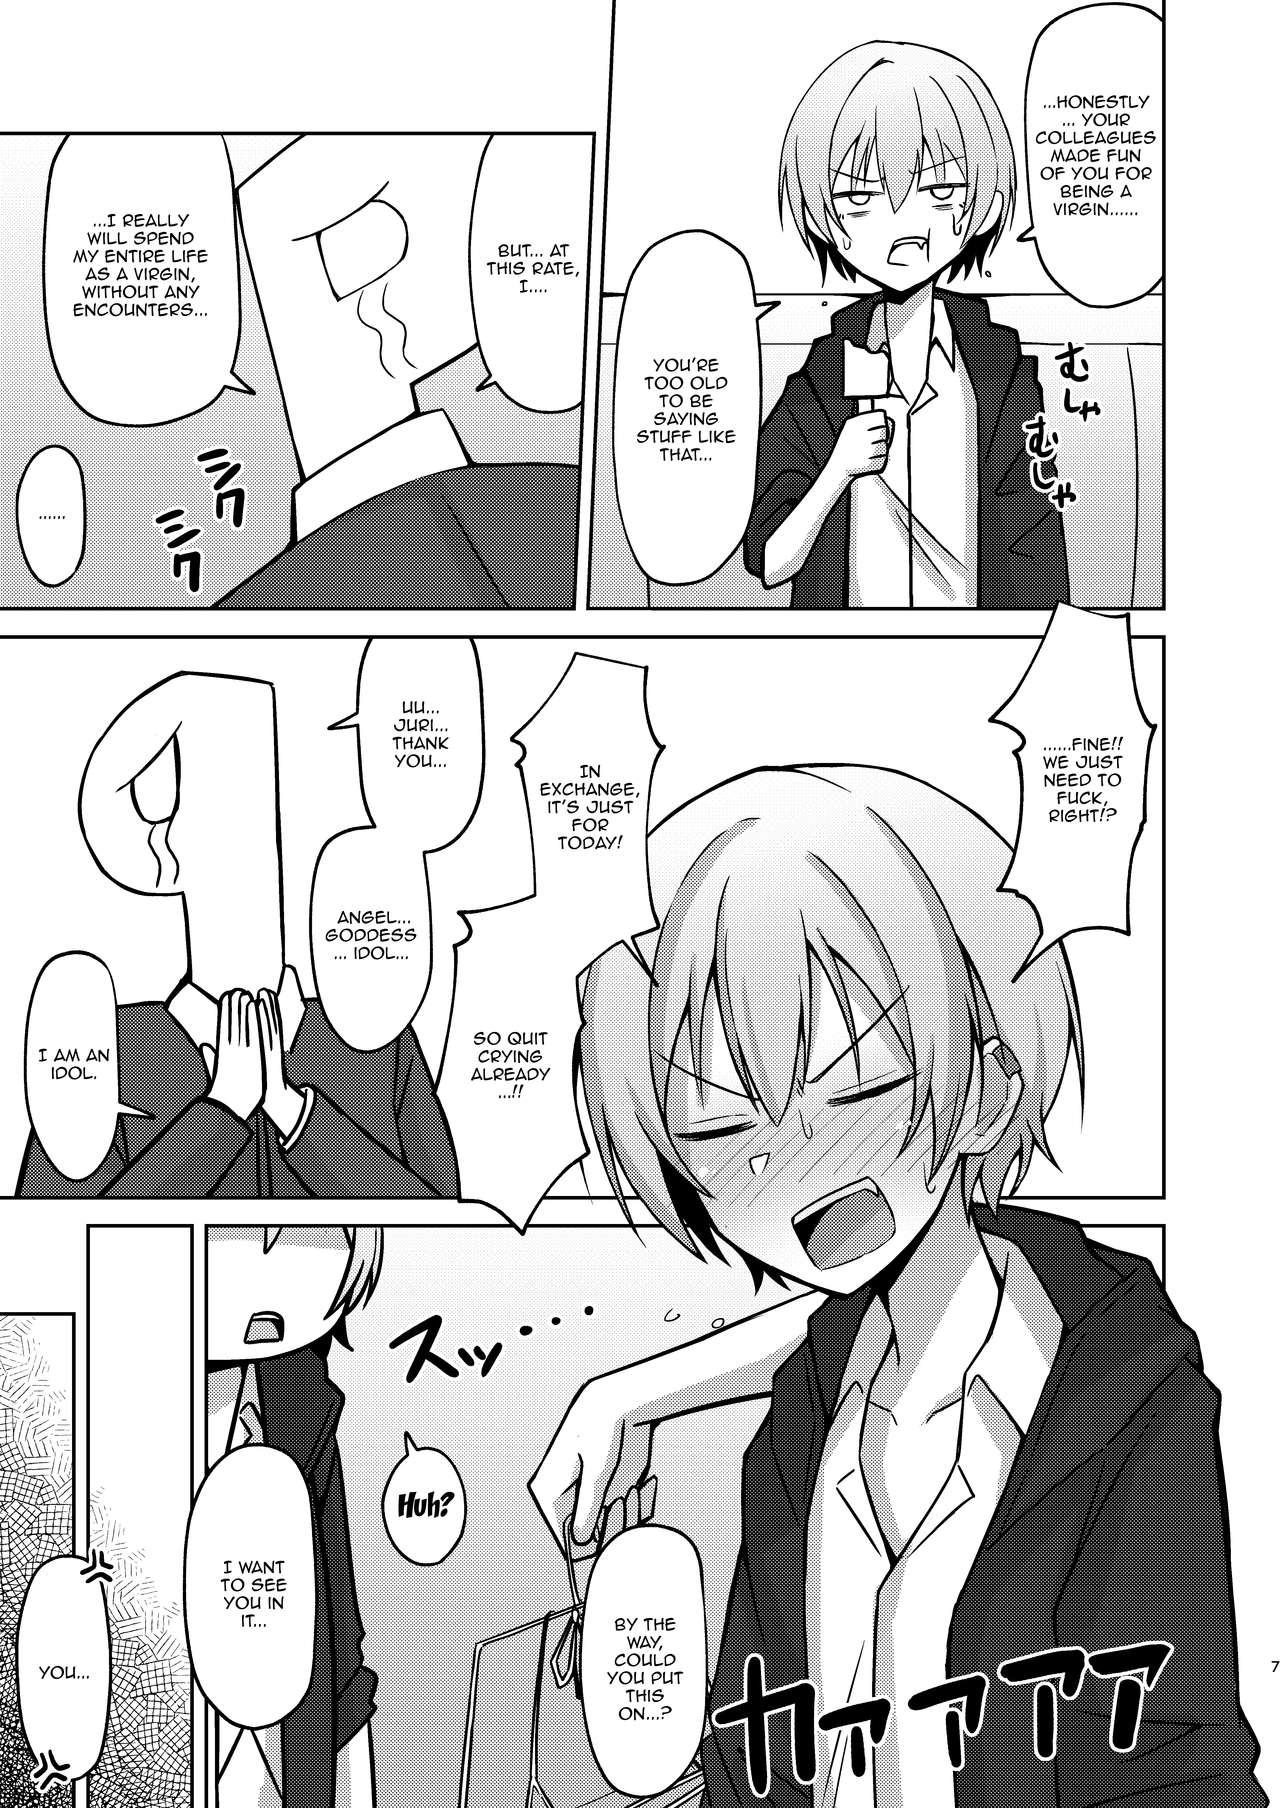 Sex Toys H nante Zettee Yannee kara na!! | There's No Way I'll Do Anything Lewd!! - The idolmaster Officesex - Page 4